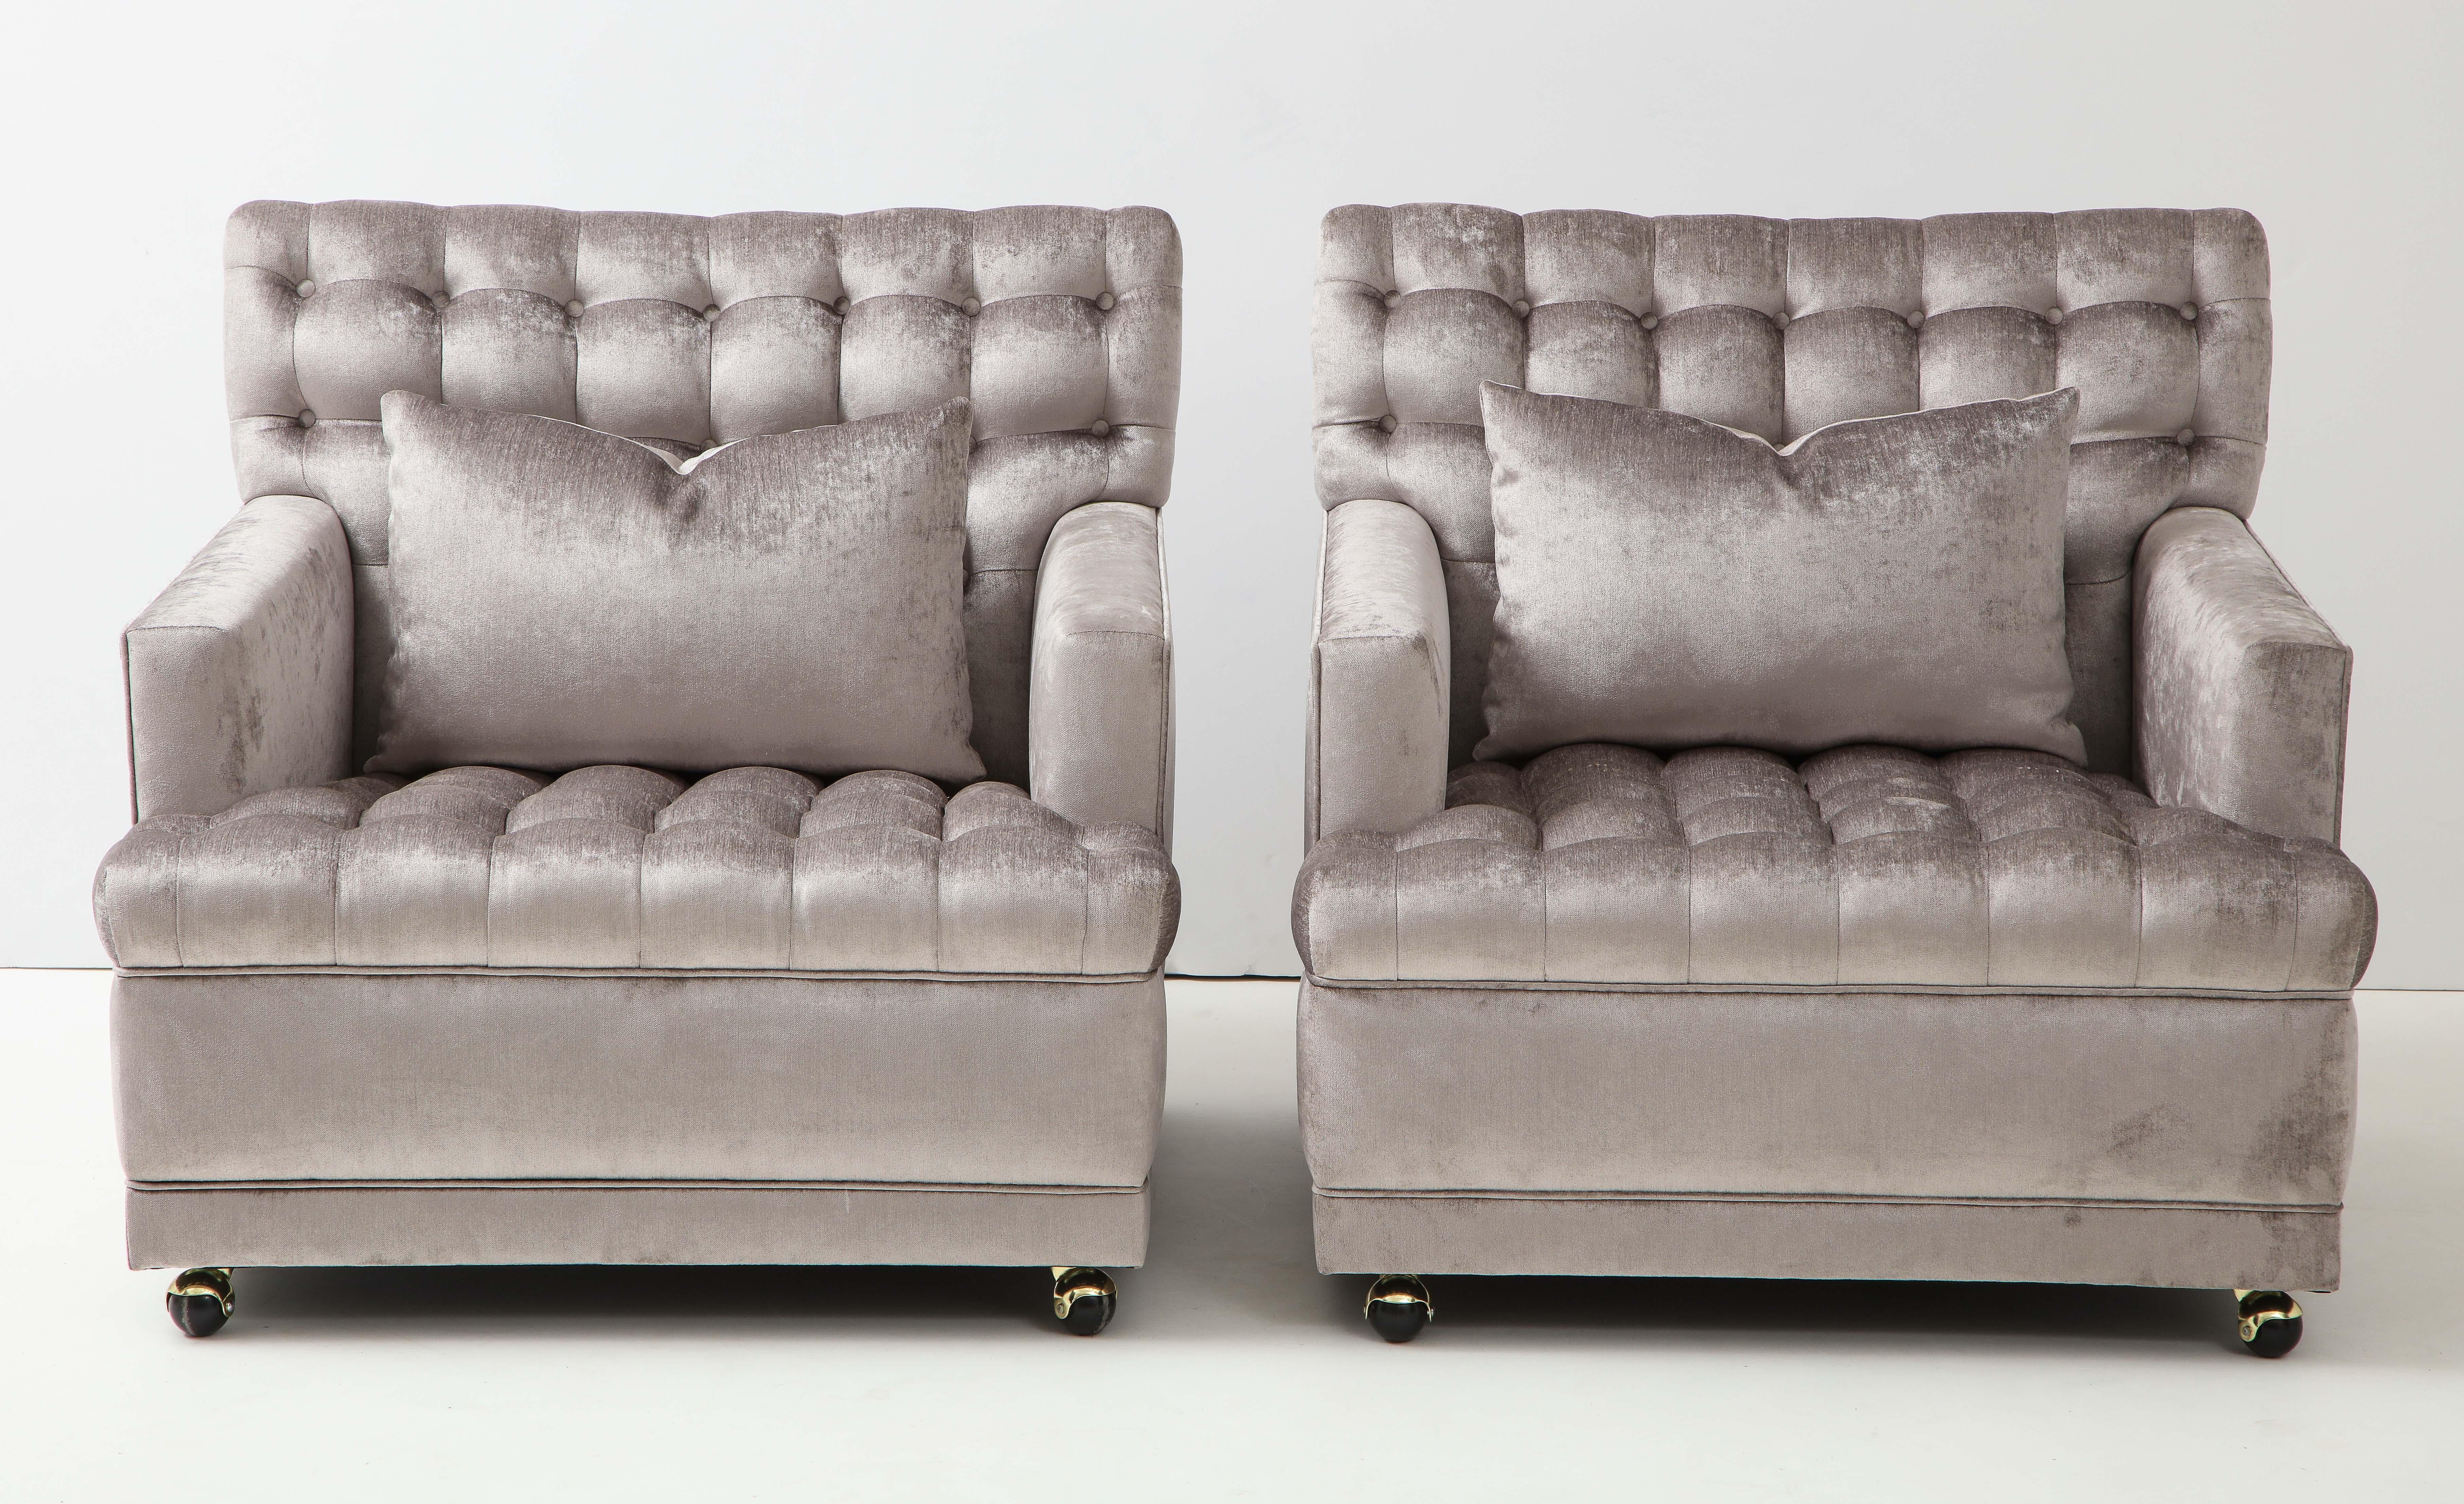 American Pair of Biscuit Tufted Club Chairs.